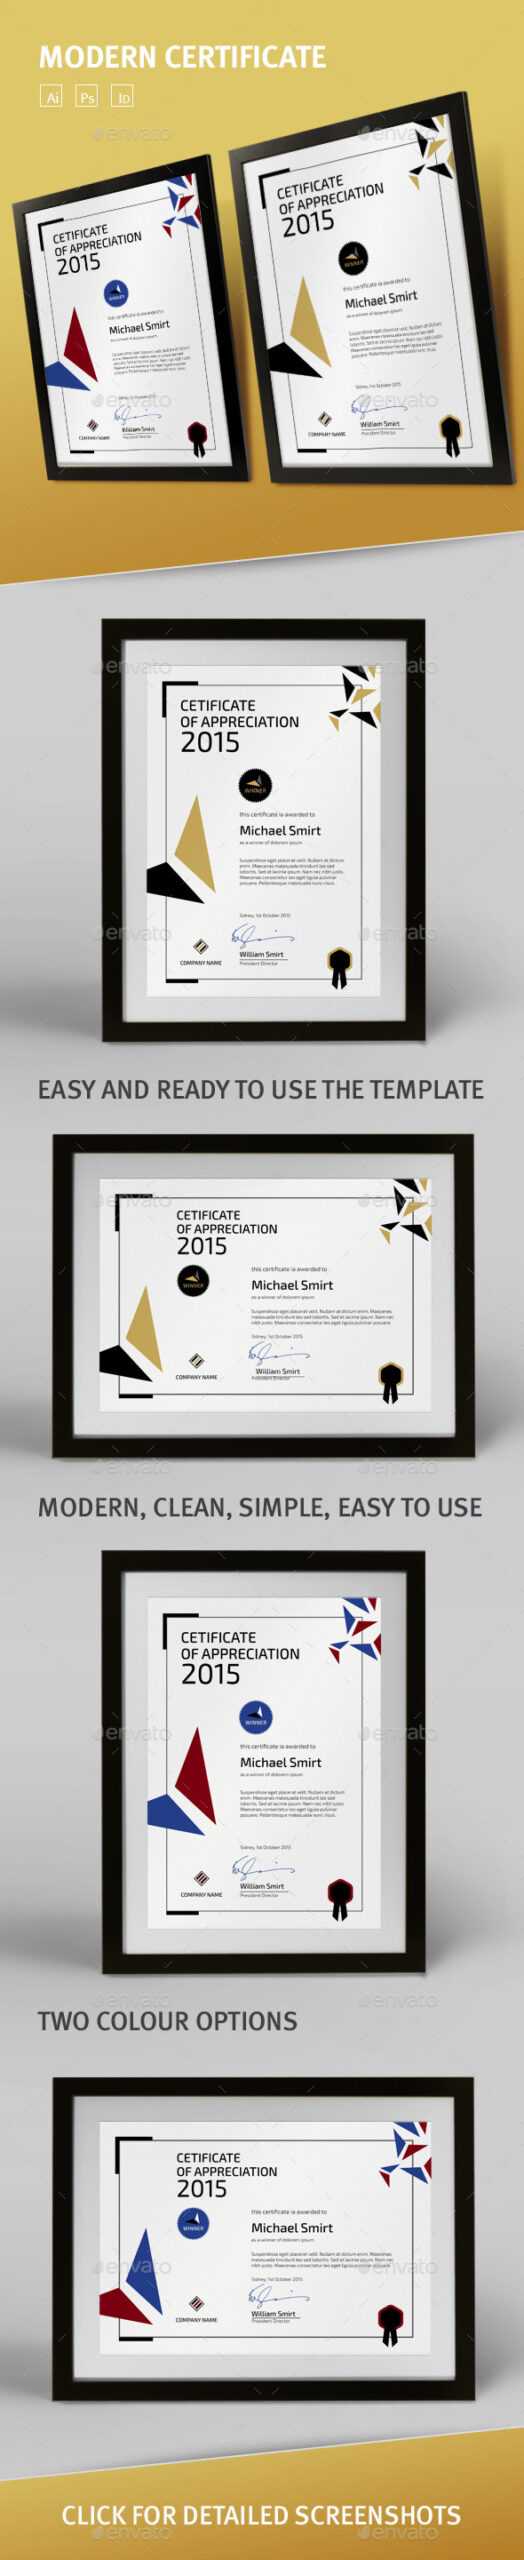 Certificate Graphics, Designs & Templates From Graphicriver With Update Certificates That Use Certificate Templates